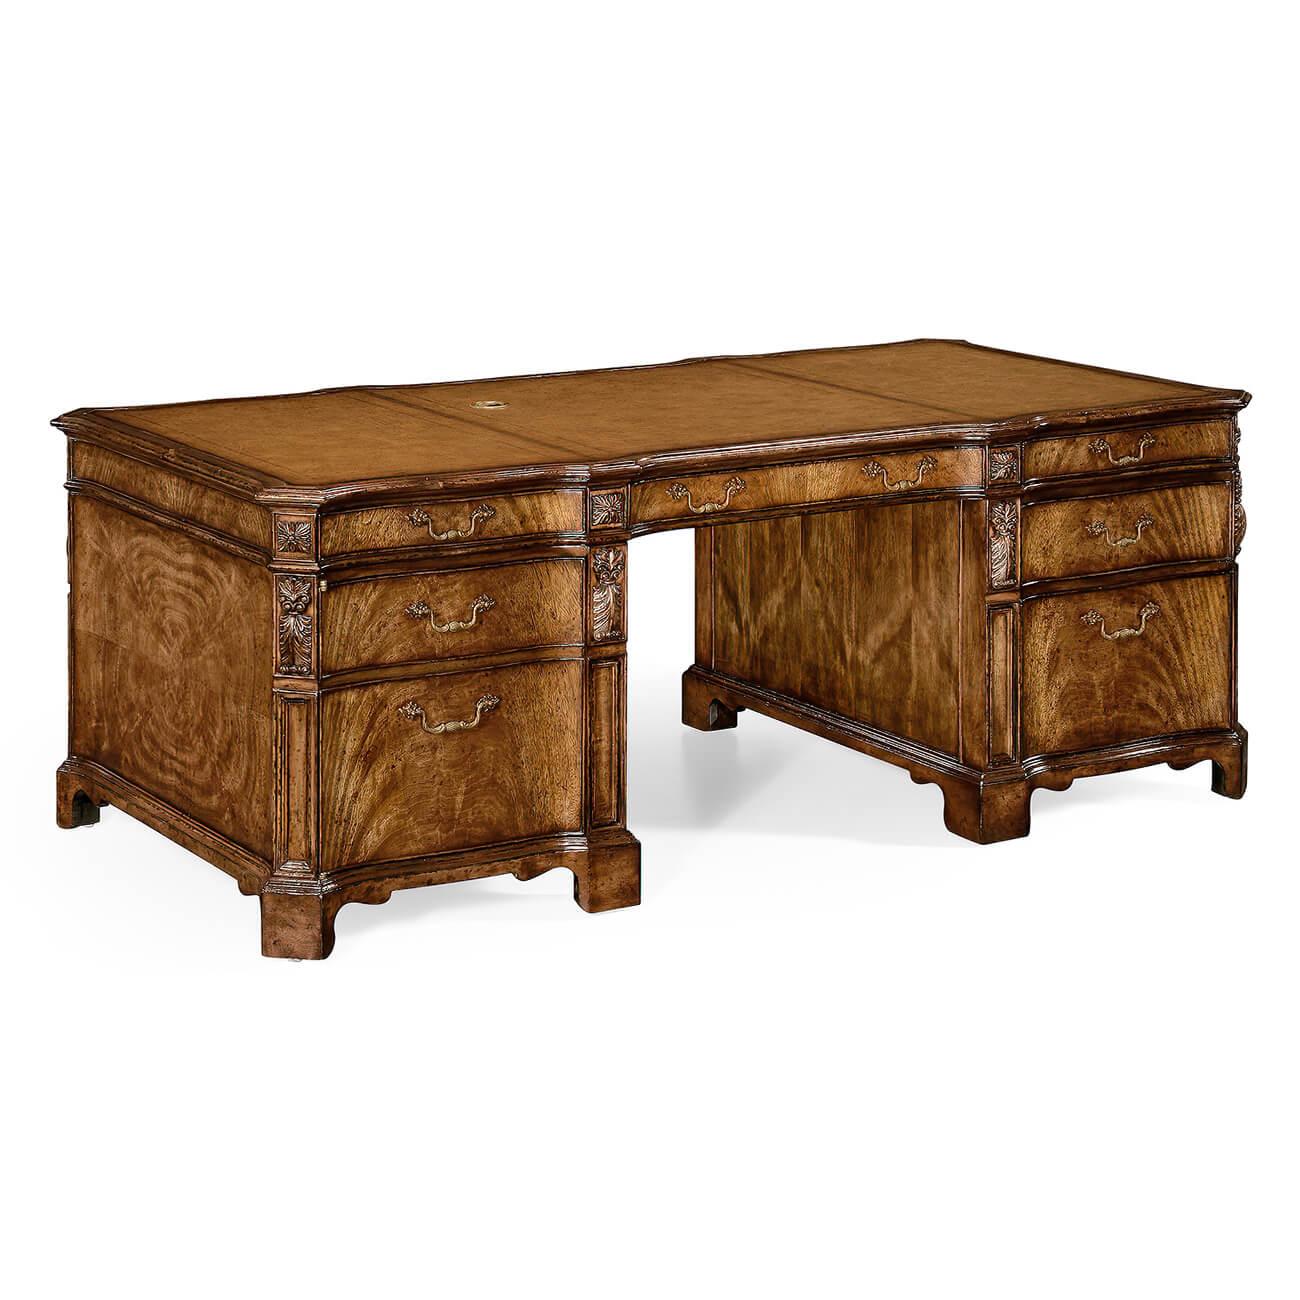 George III style walnut faux partners pedestal desk with oak secondary woods, with a tan inset leather top, cable management system and secret drawers. Having canted corners with carved acanthus elements, serpentine carved and molded edge, the